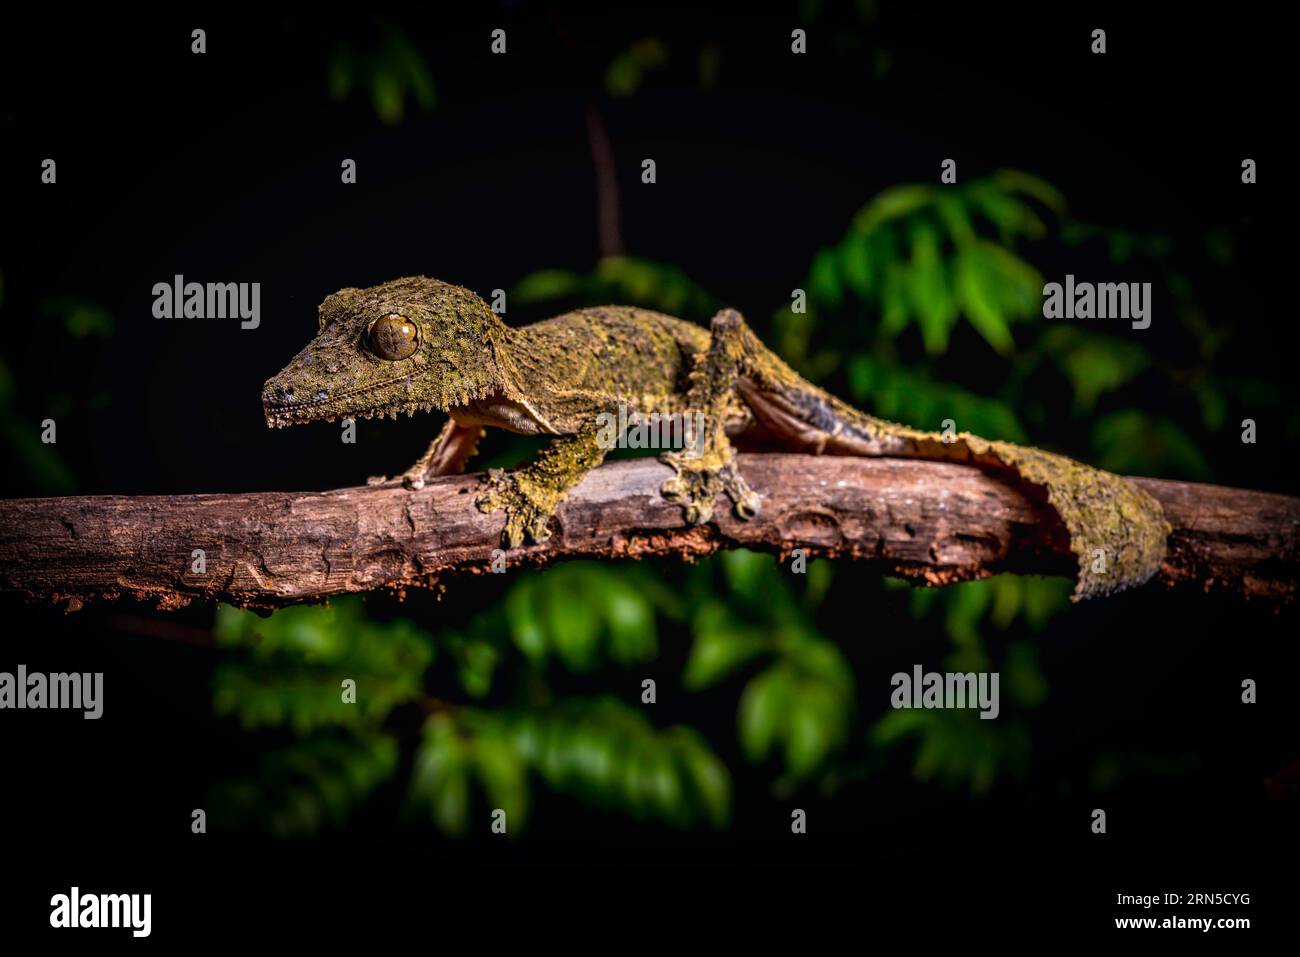 New description Leaf-tailed gecko (Uroplatus garamaso) in the dry forests of the Loki Manambato Reserve in northern Madagascar Stock Photo